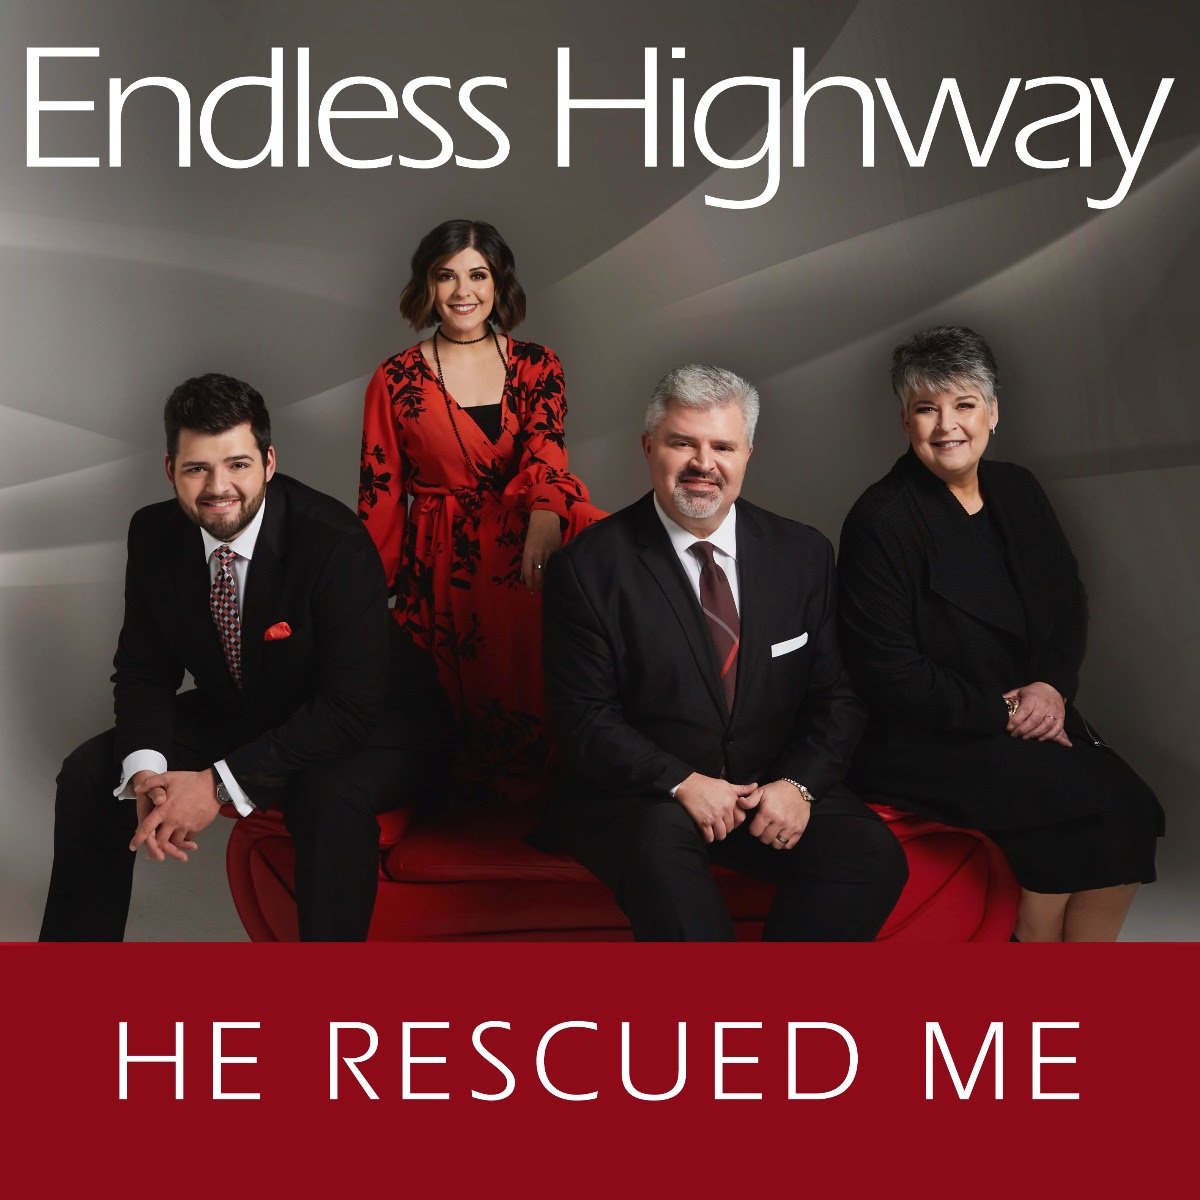 Endless Highway Tells of Redemption In “He Rescued Me” – Absolutely